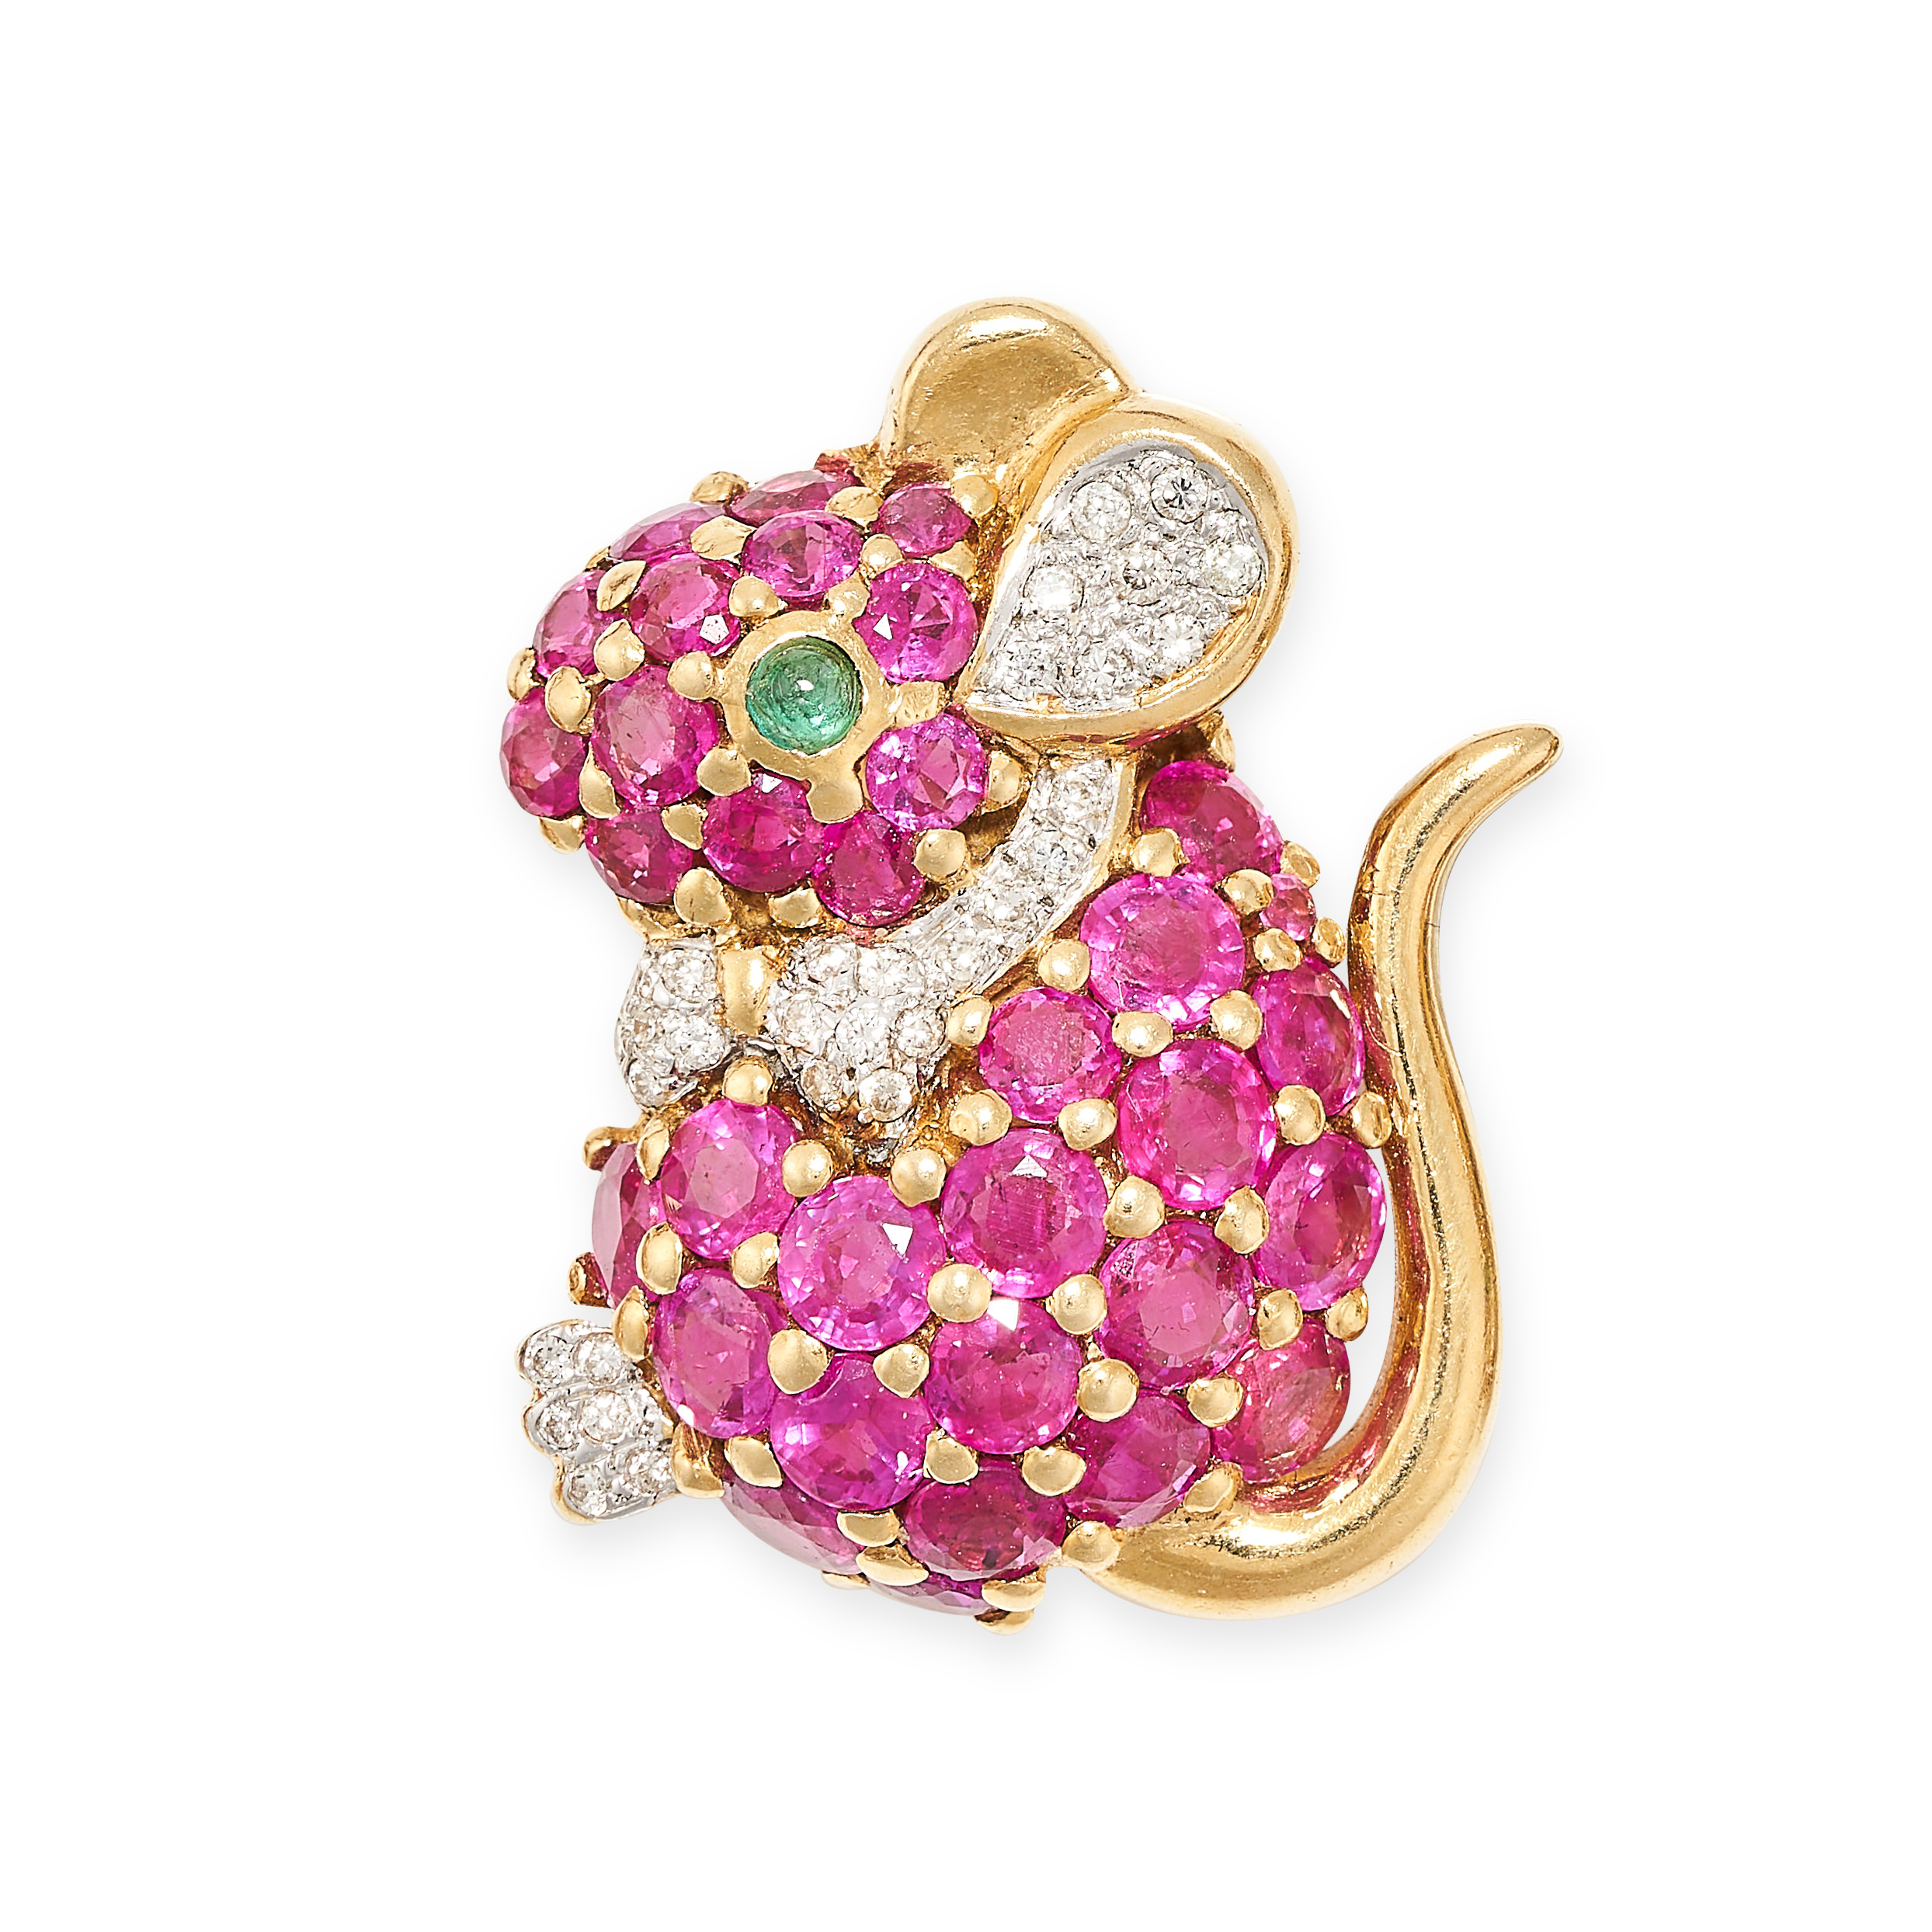 A RUBY, EMERALD AND DIAMOND MOUSE BROOCH / PENDANT in yellow gold, designed as a mouse, the body set